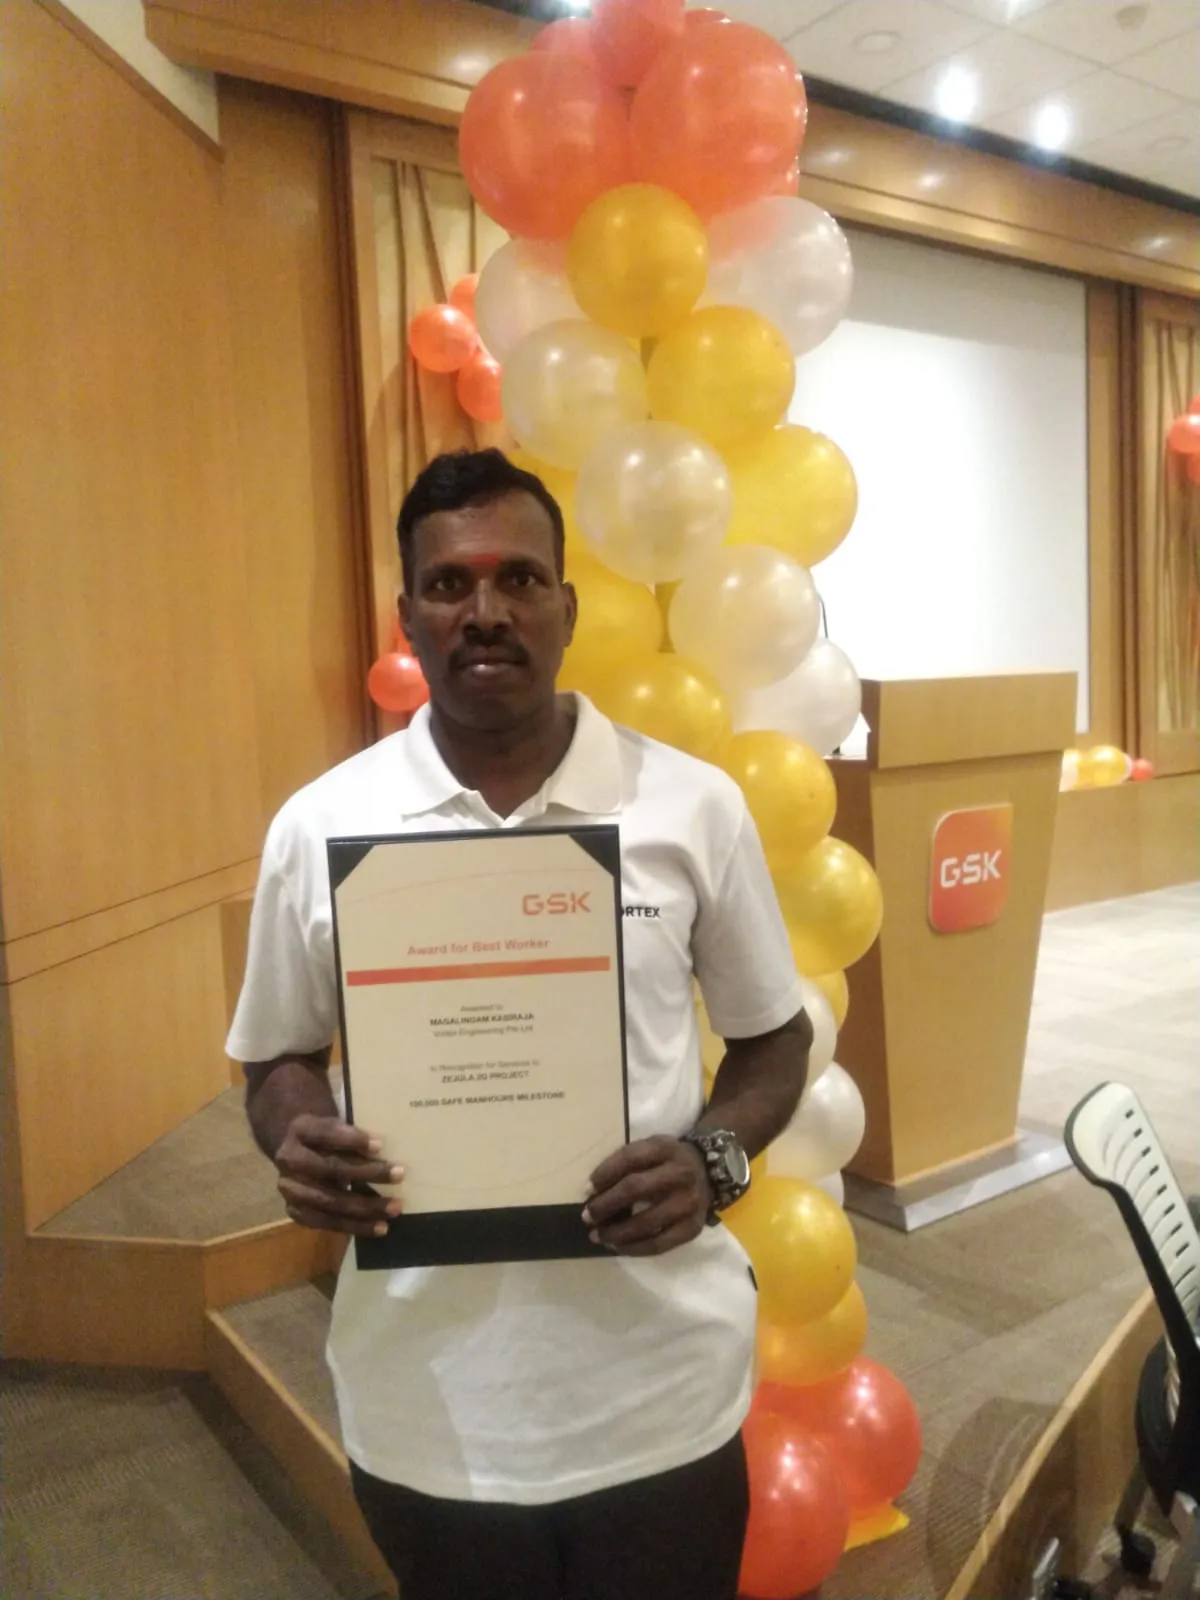 Safety award given to a worker